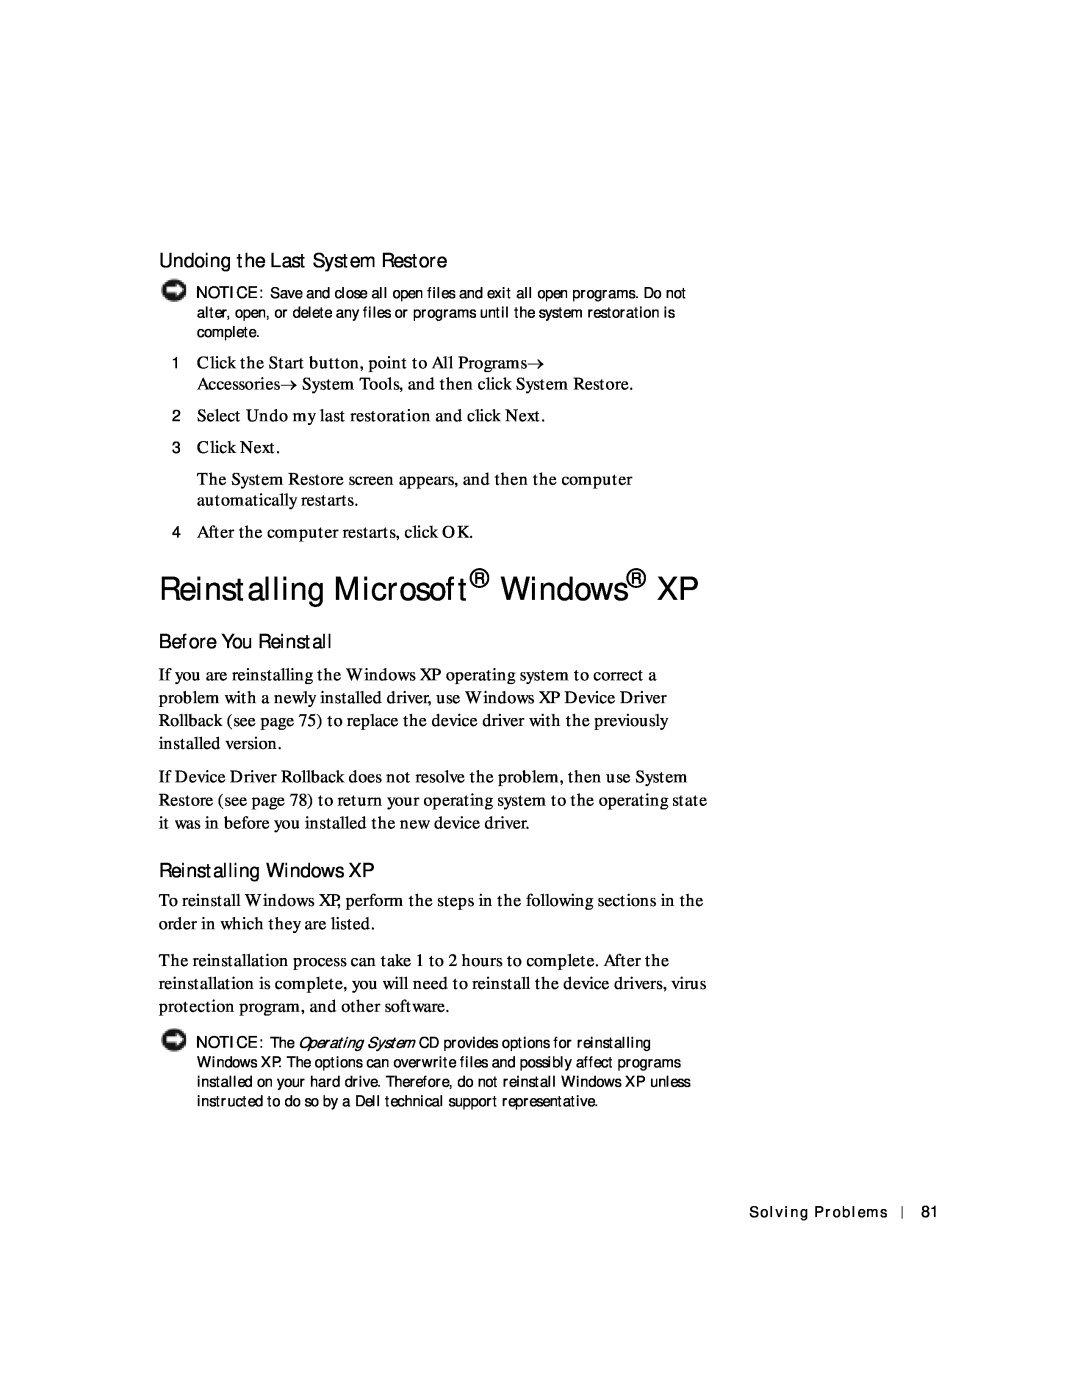 Dell 4150 owner manual Reinstalling Microsoft Windows XP, Undoing the Last System Restore, Before You Reinstall 